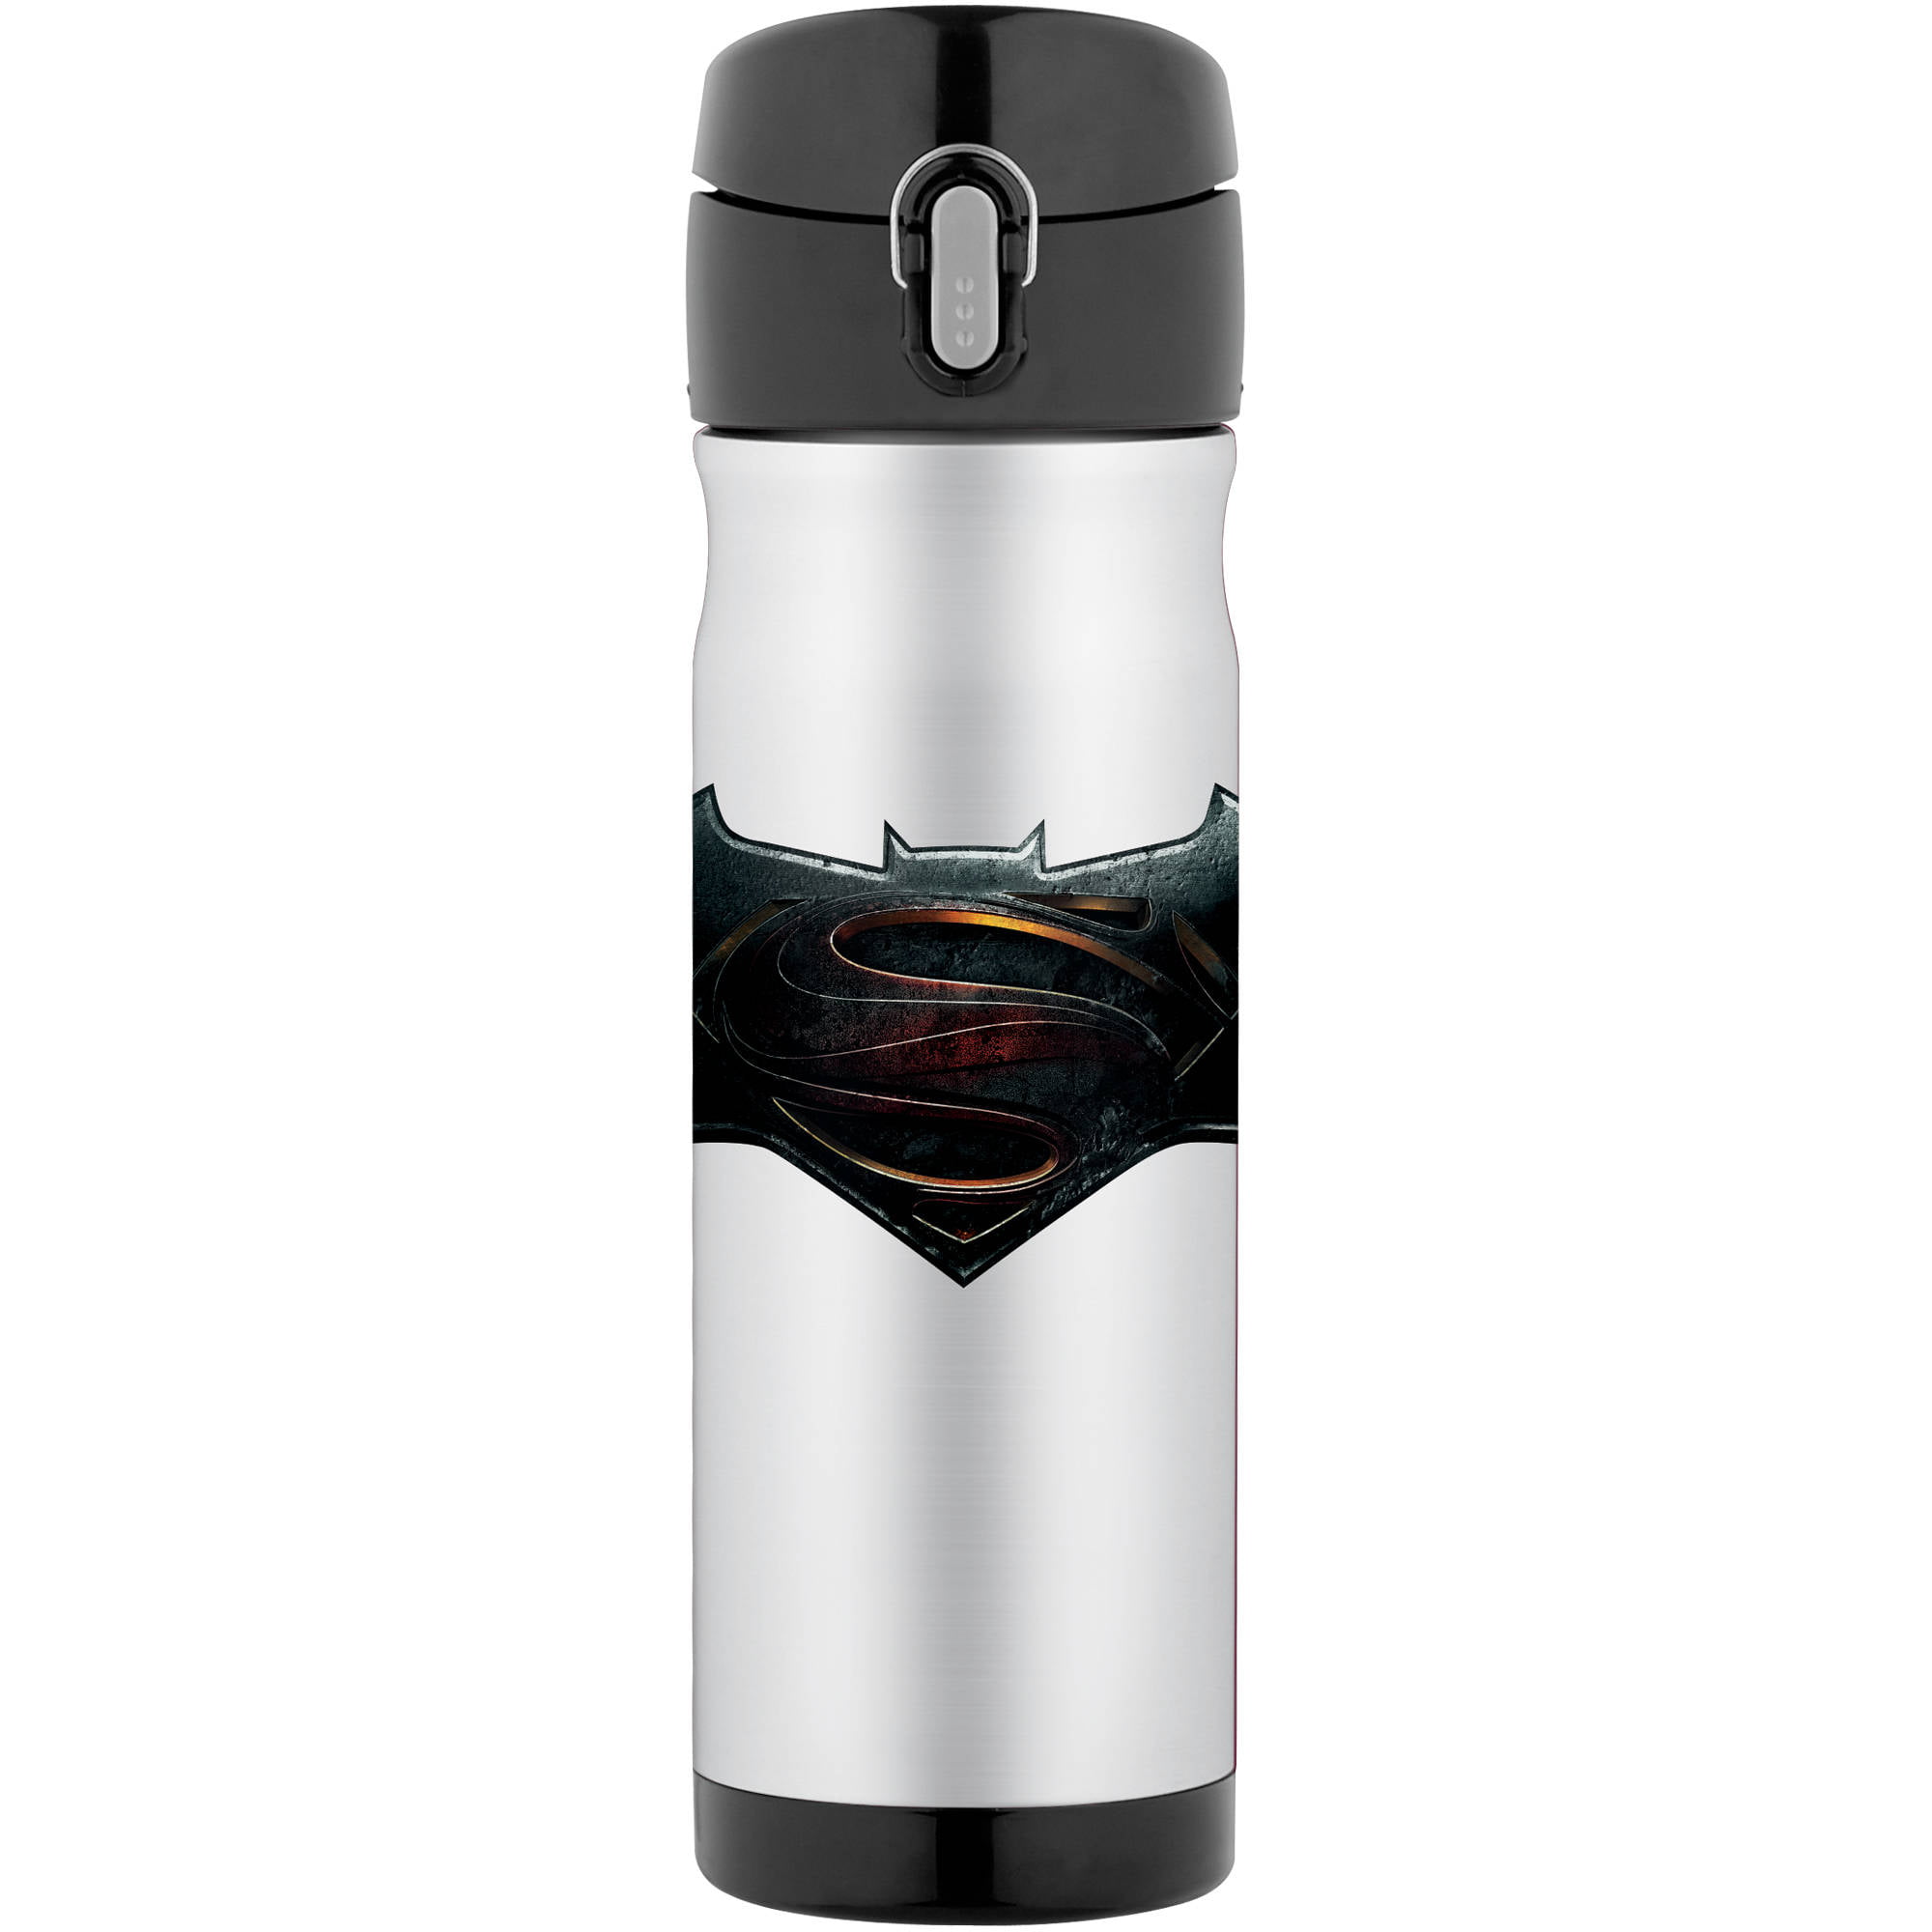 16oz STAINLESS STEEL DIRECT DRINK BOTTLE – Thermos Brand